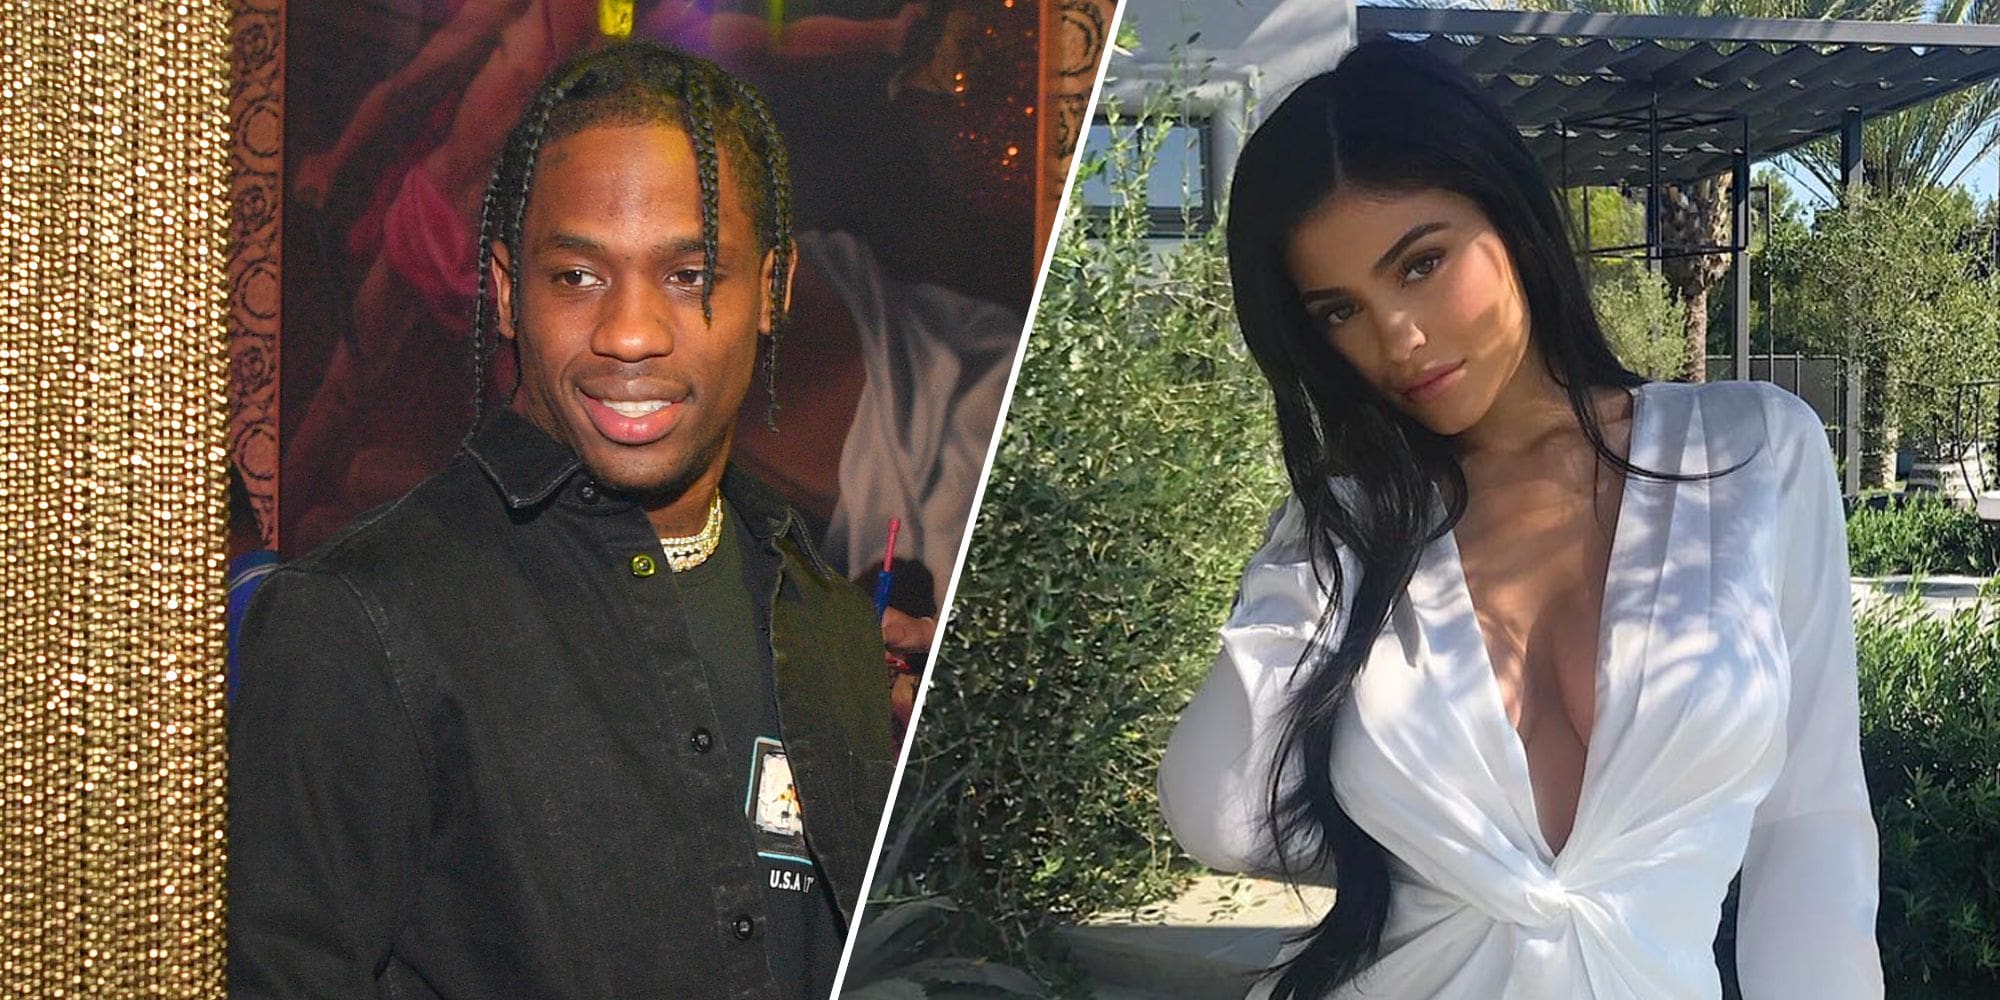 Kylie Jenner And Travis Scott's Relationship Is Reportedly Seriously Damaged Following The Cheating Rumors